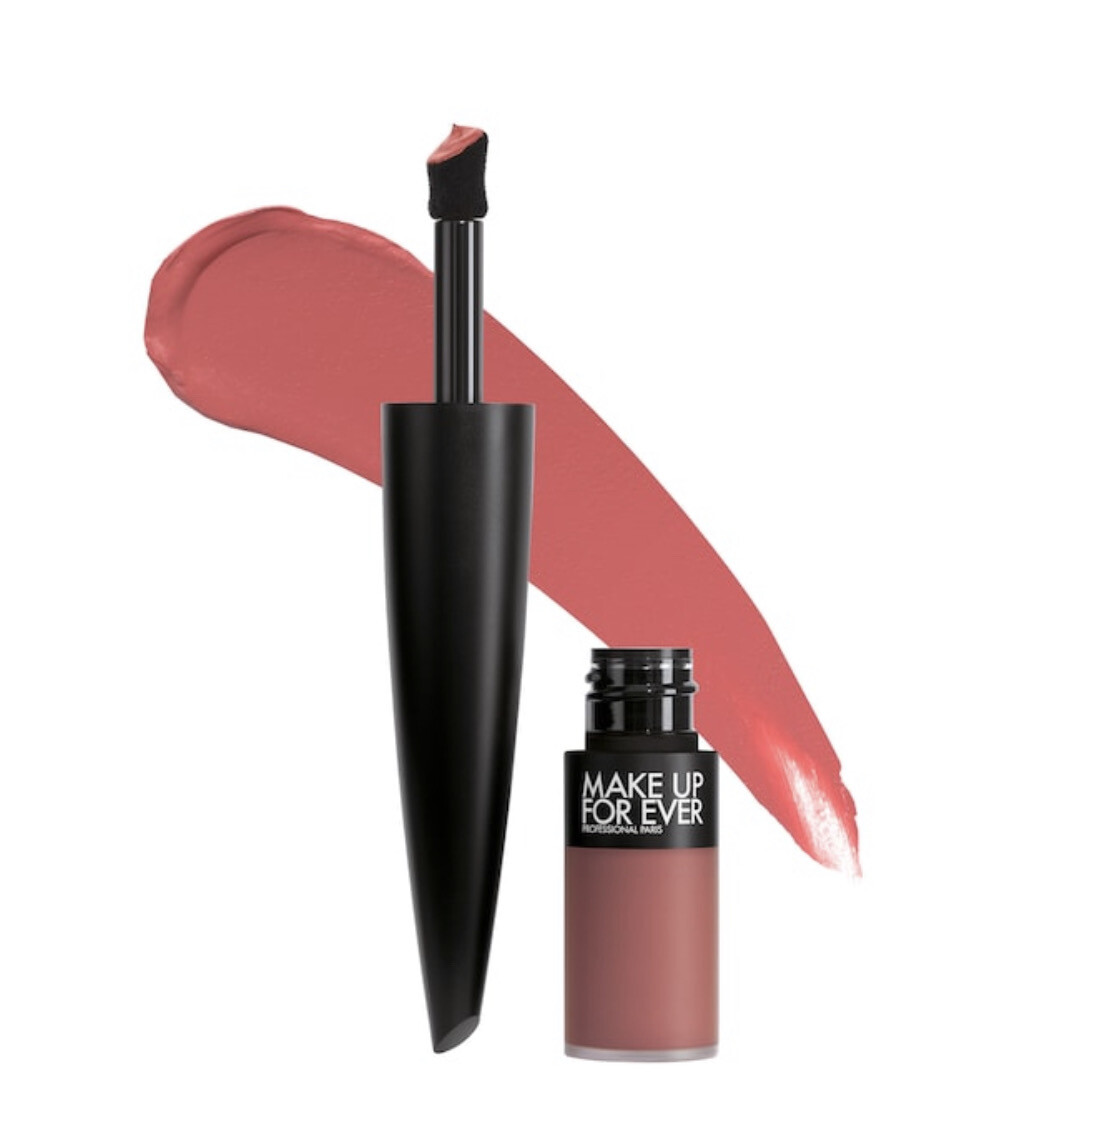 Make Up For Ever - Rouge Artist For Ever Matte 24HR Longwear Liquid Lipstick | 240 Rose Now And Always - coral rose